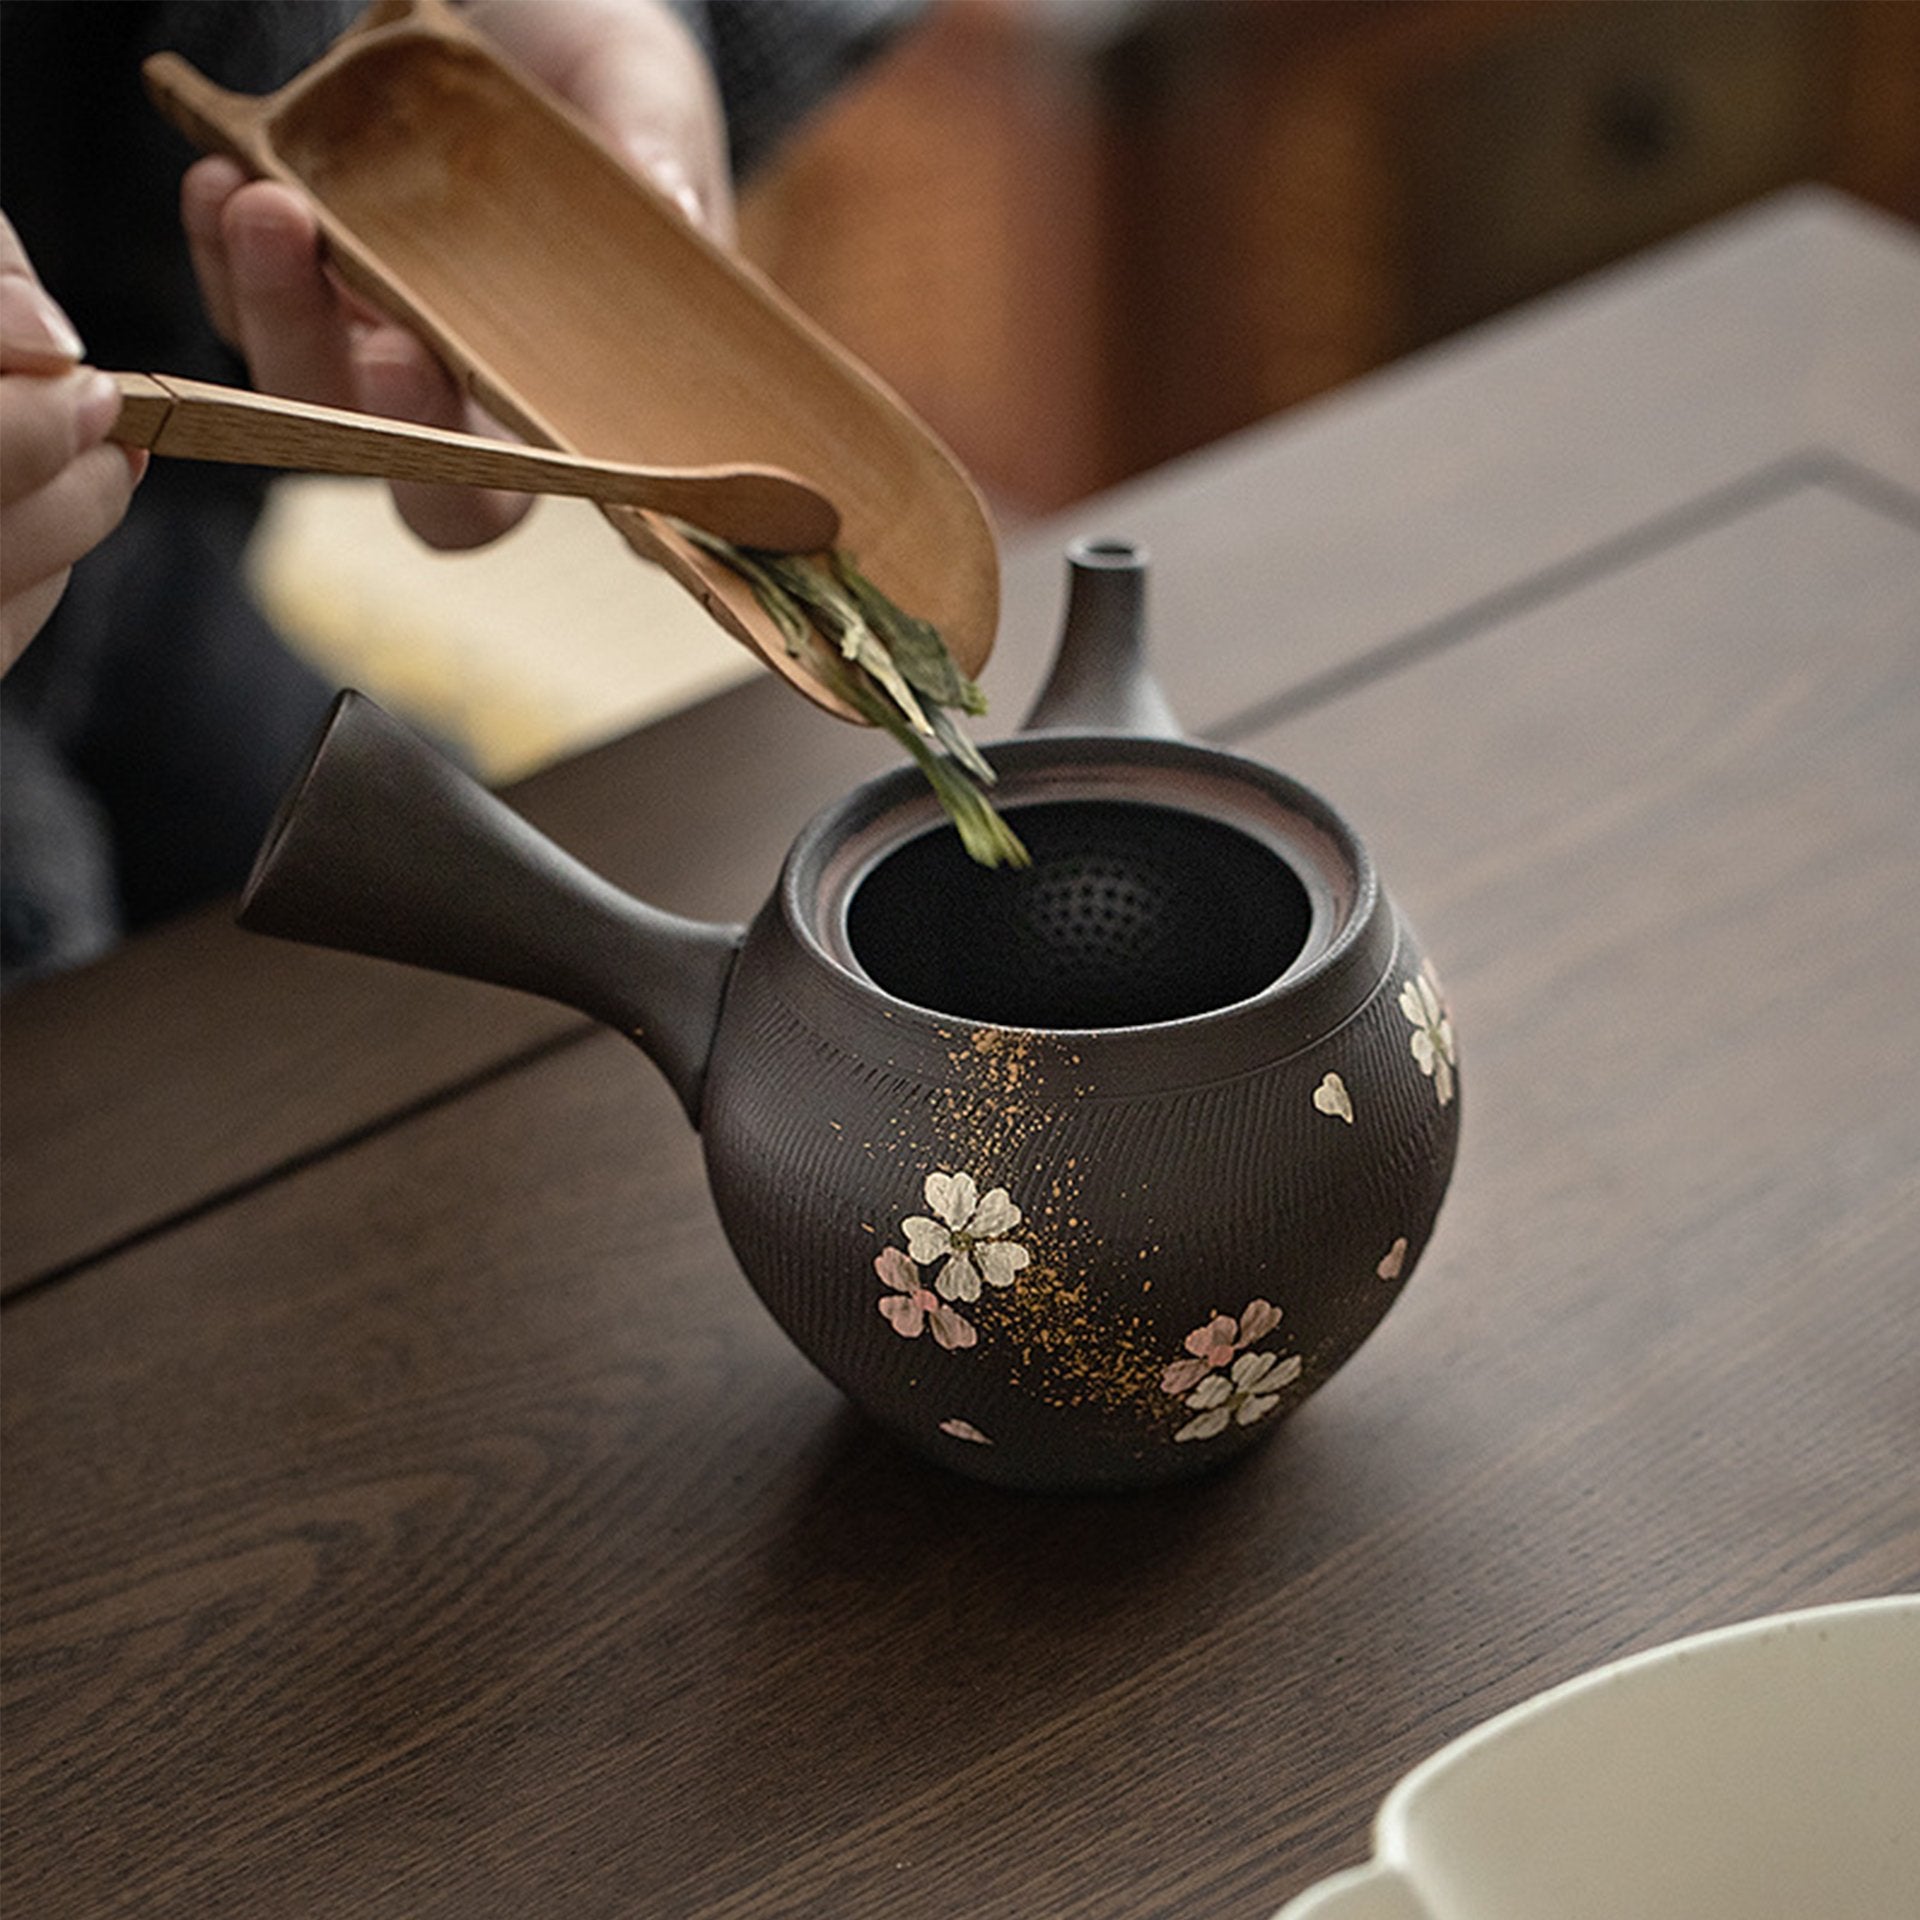 Person pouring tea from a dark teapot adorned with gold and floral motifs.